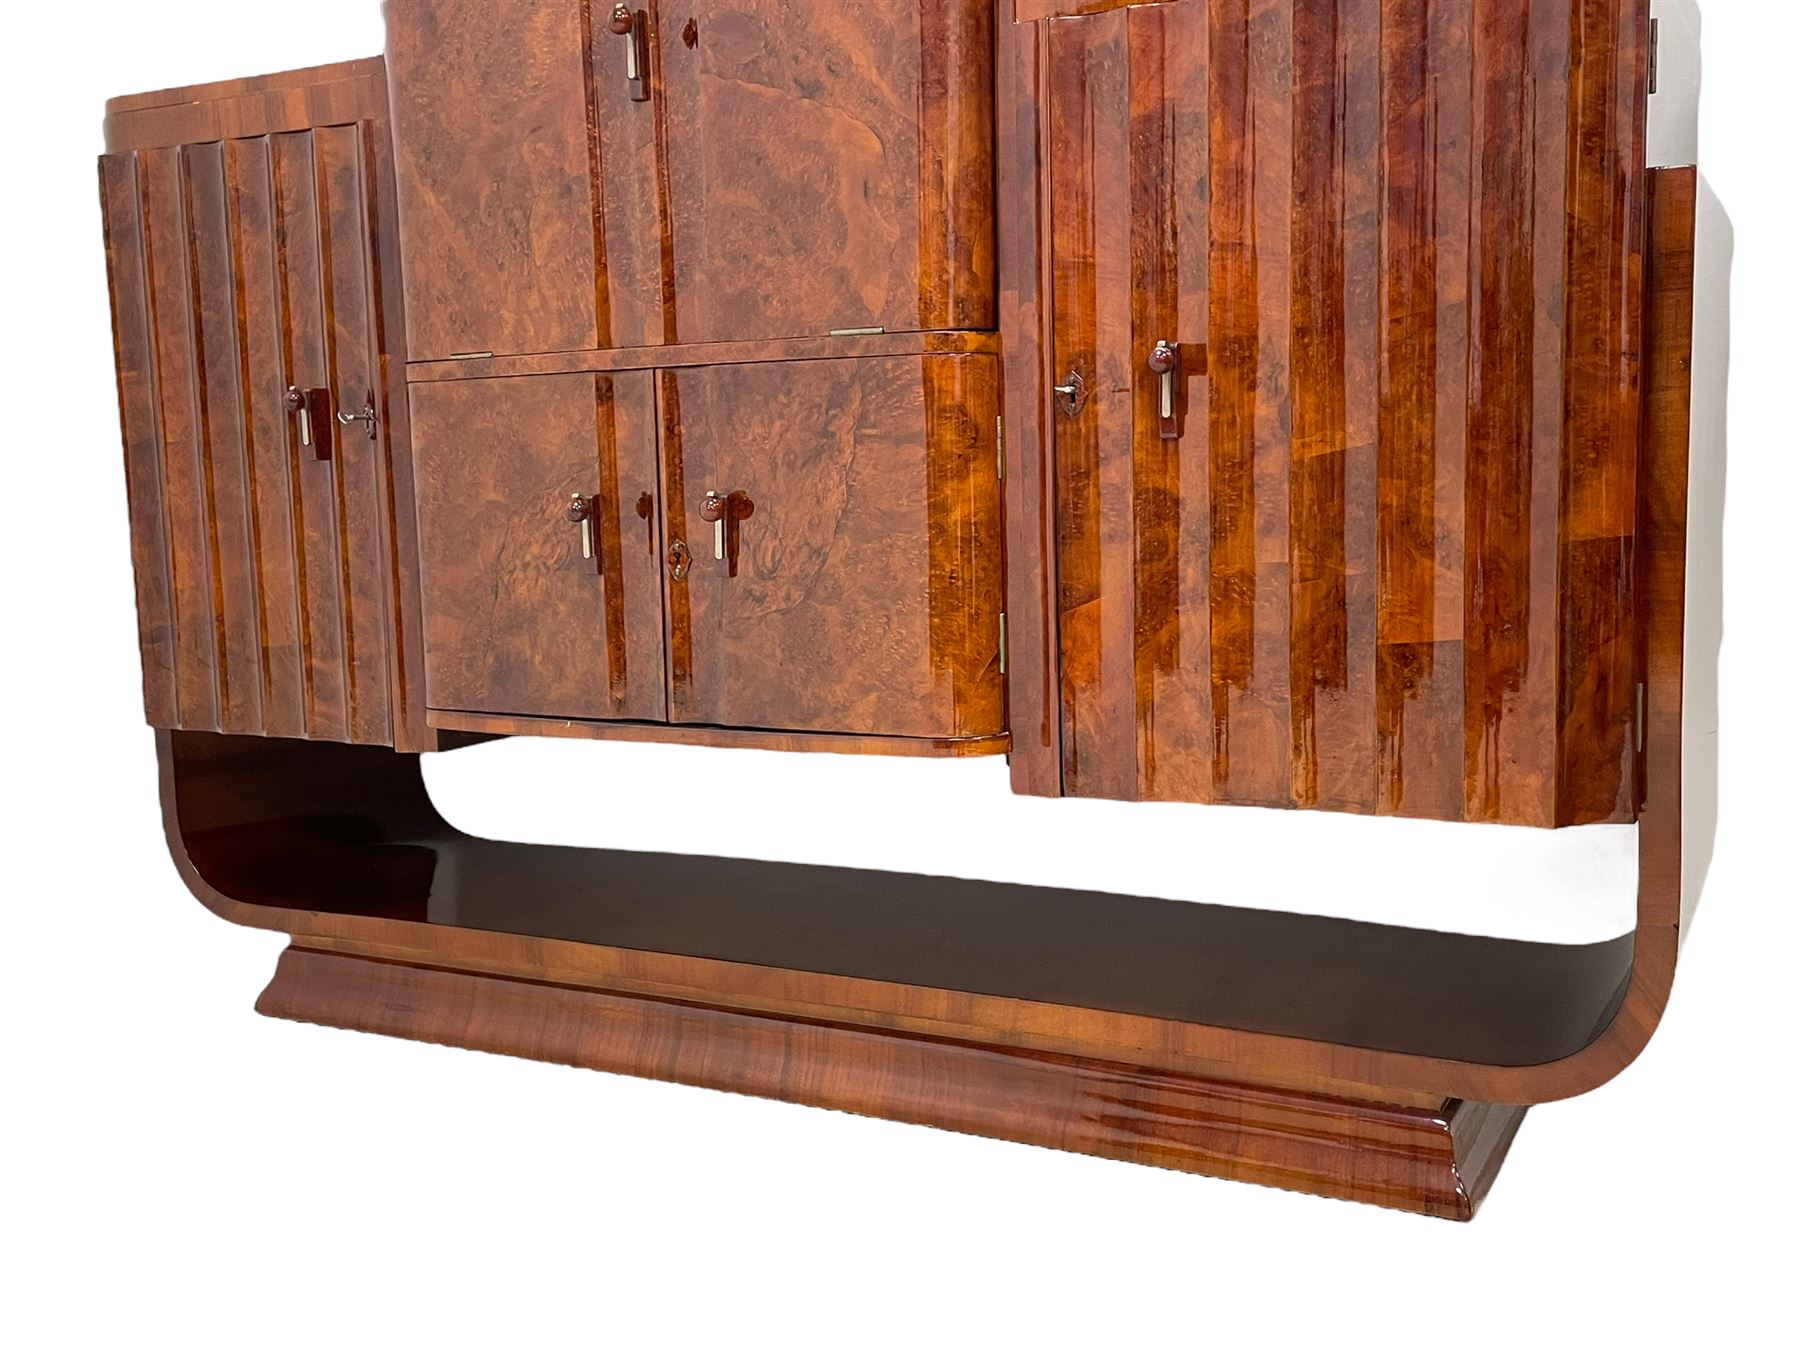 Attributed to Harry & Lou Epstein - Art Deco circa. 1930s figured walnut sideboard - Image 17 of 17